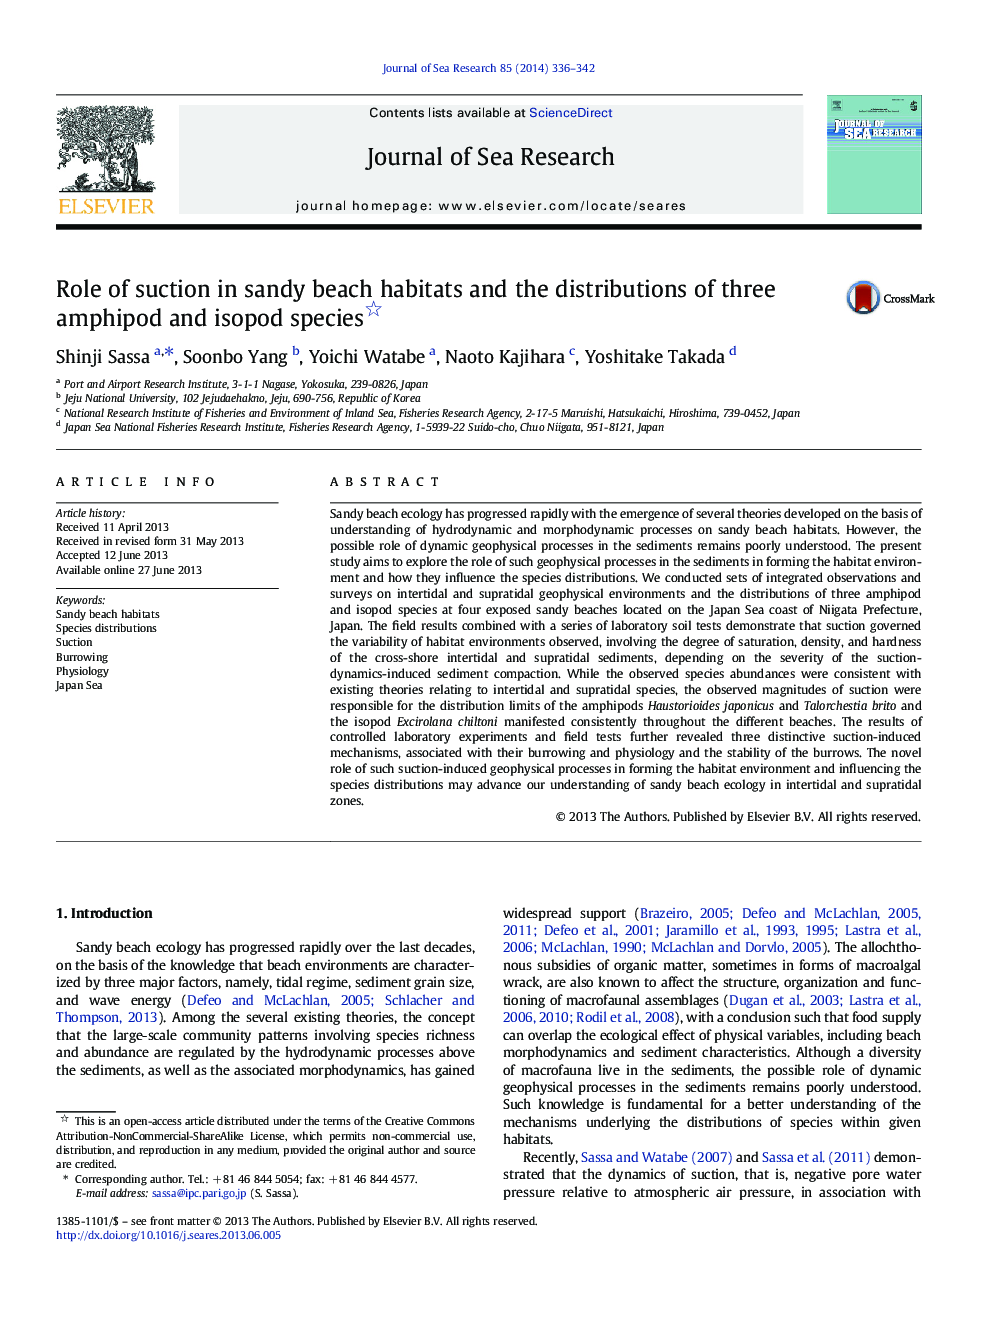 Role of suction in sandy beach habitats and the distributions of three amphipod and isopod species